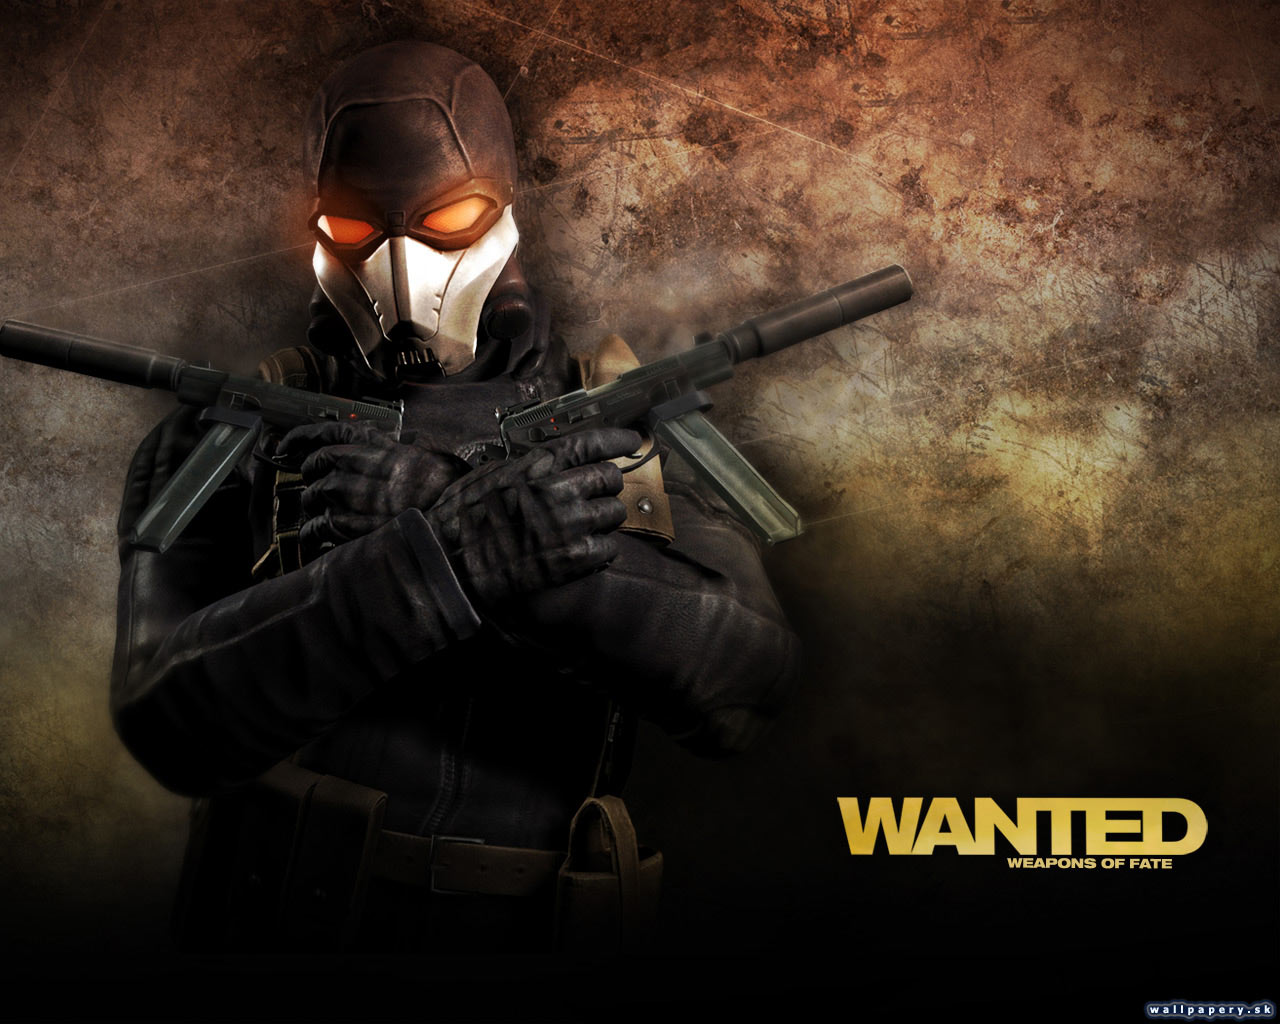 Wanted: Weapons of Fate - wallpaper 28